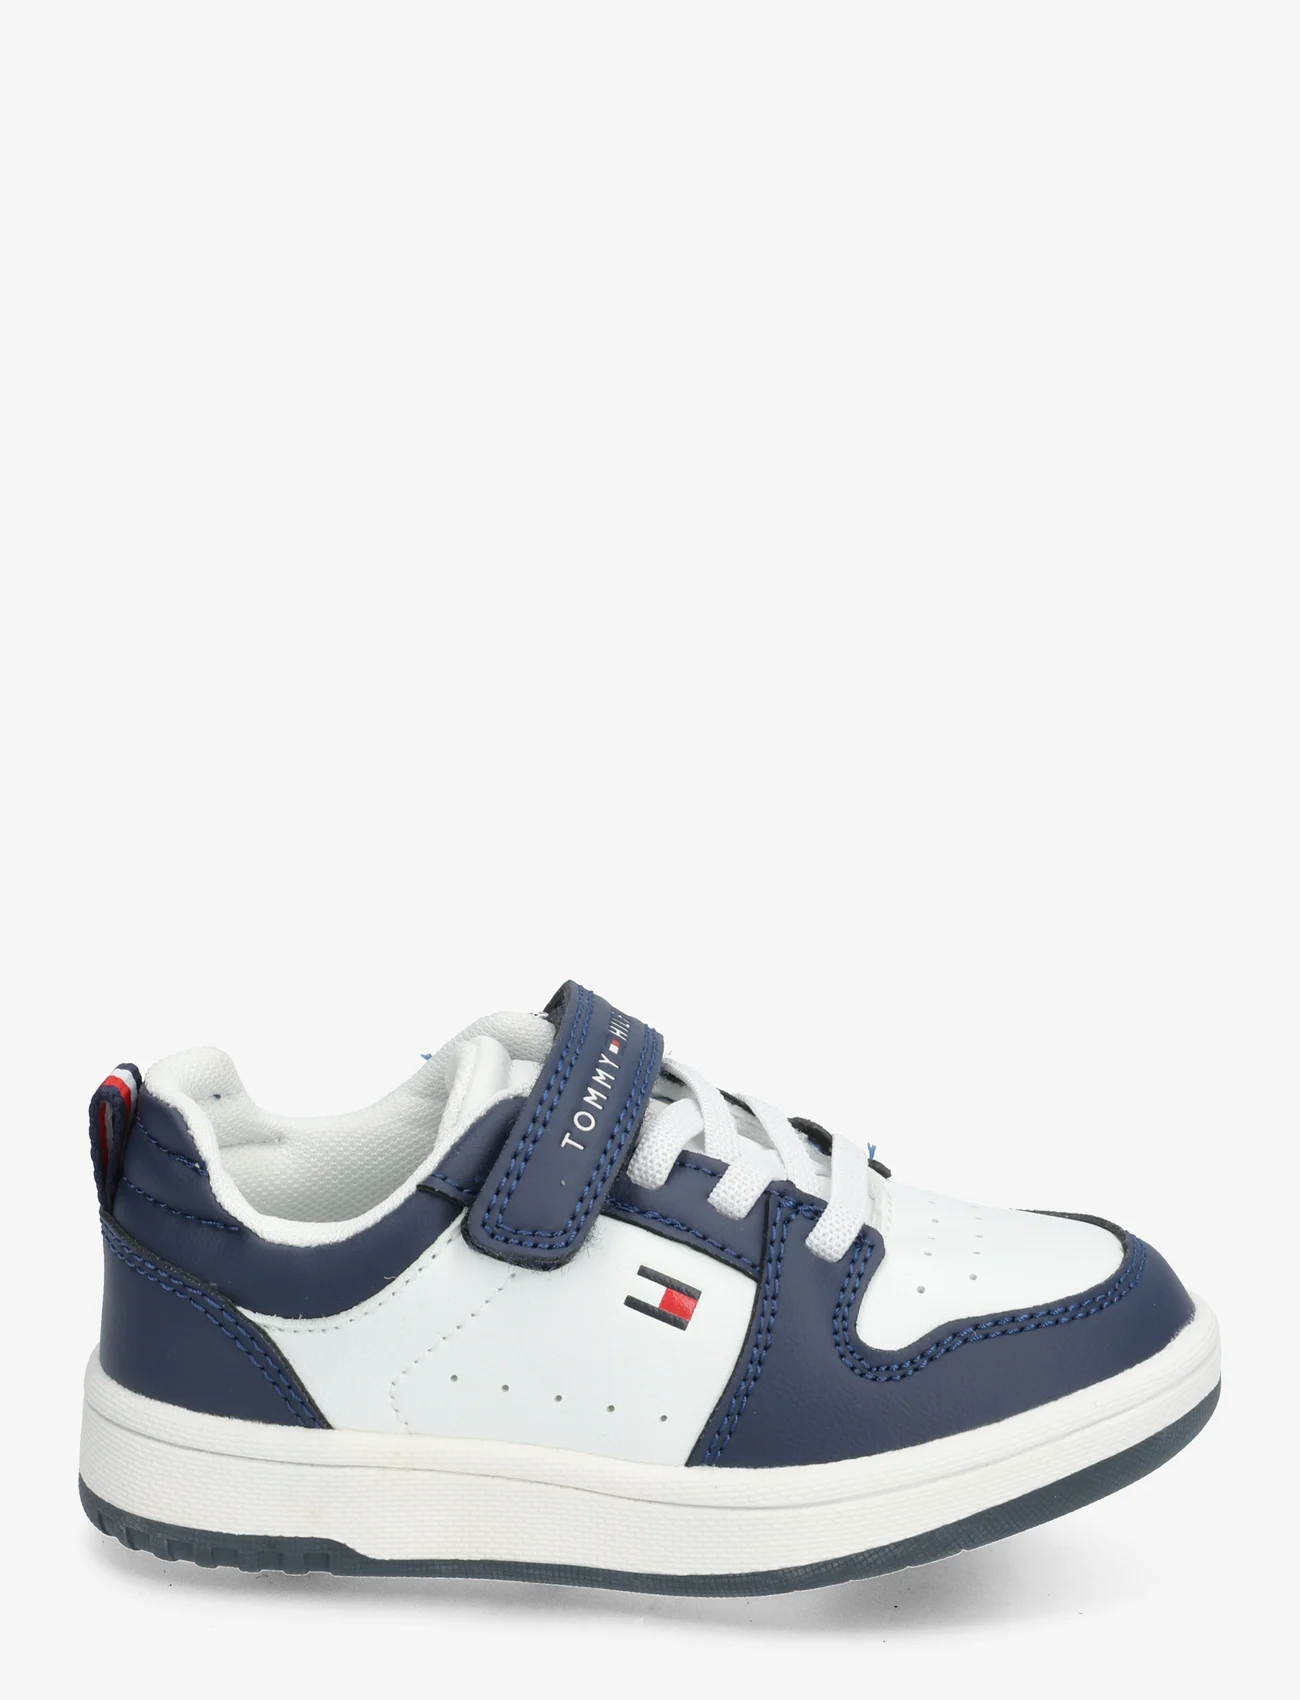 Tommy Hilfiger - LOW CUT LACE-UP/VELCRO SNEAKER - sommerschnäppchen - blue/white - 1